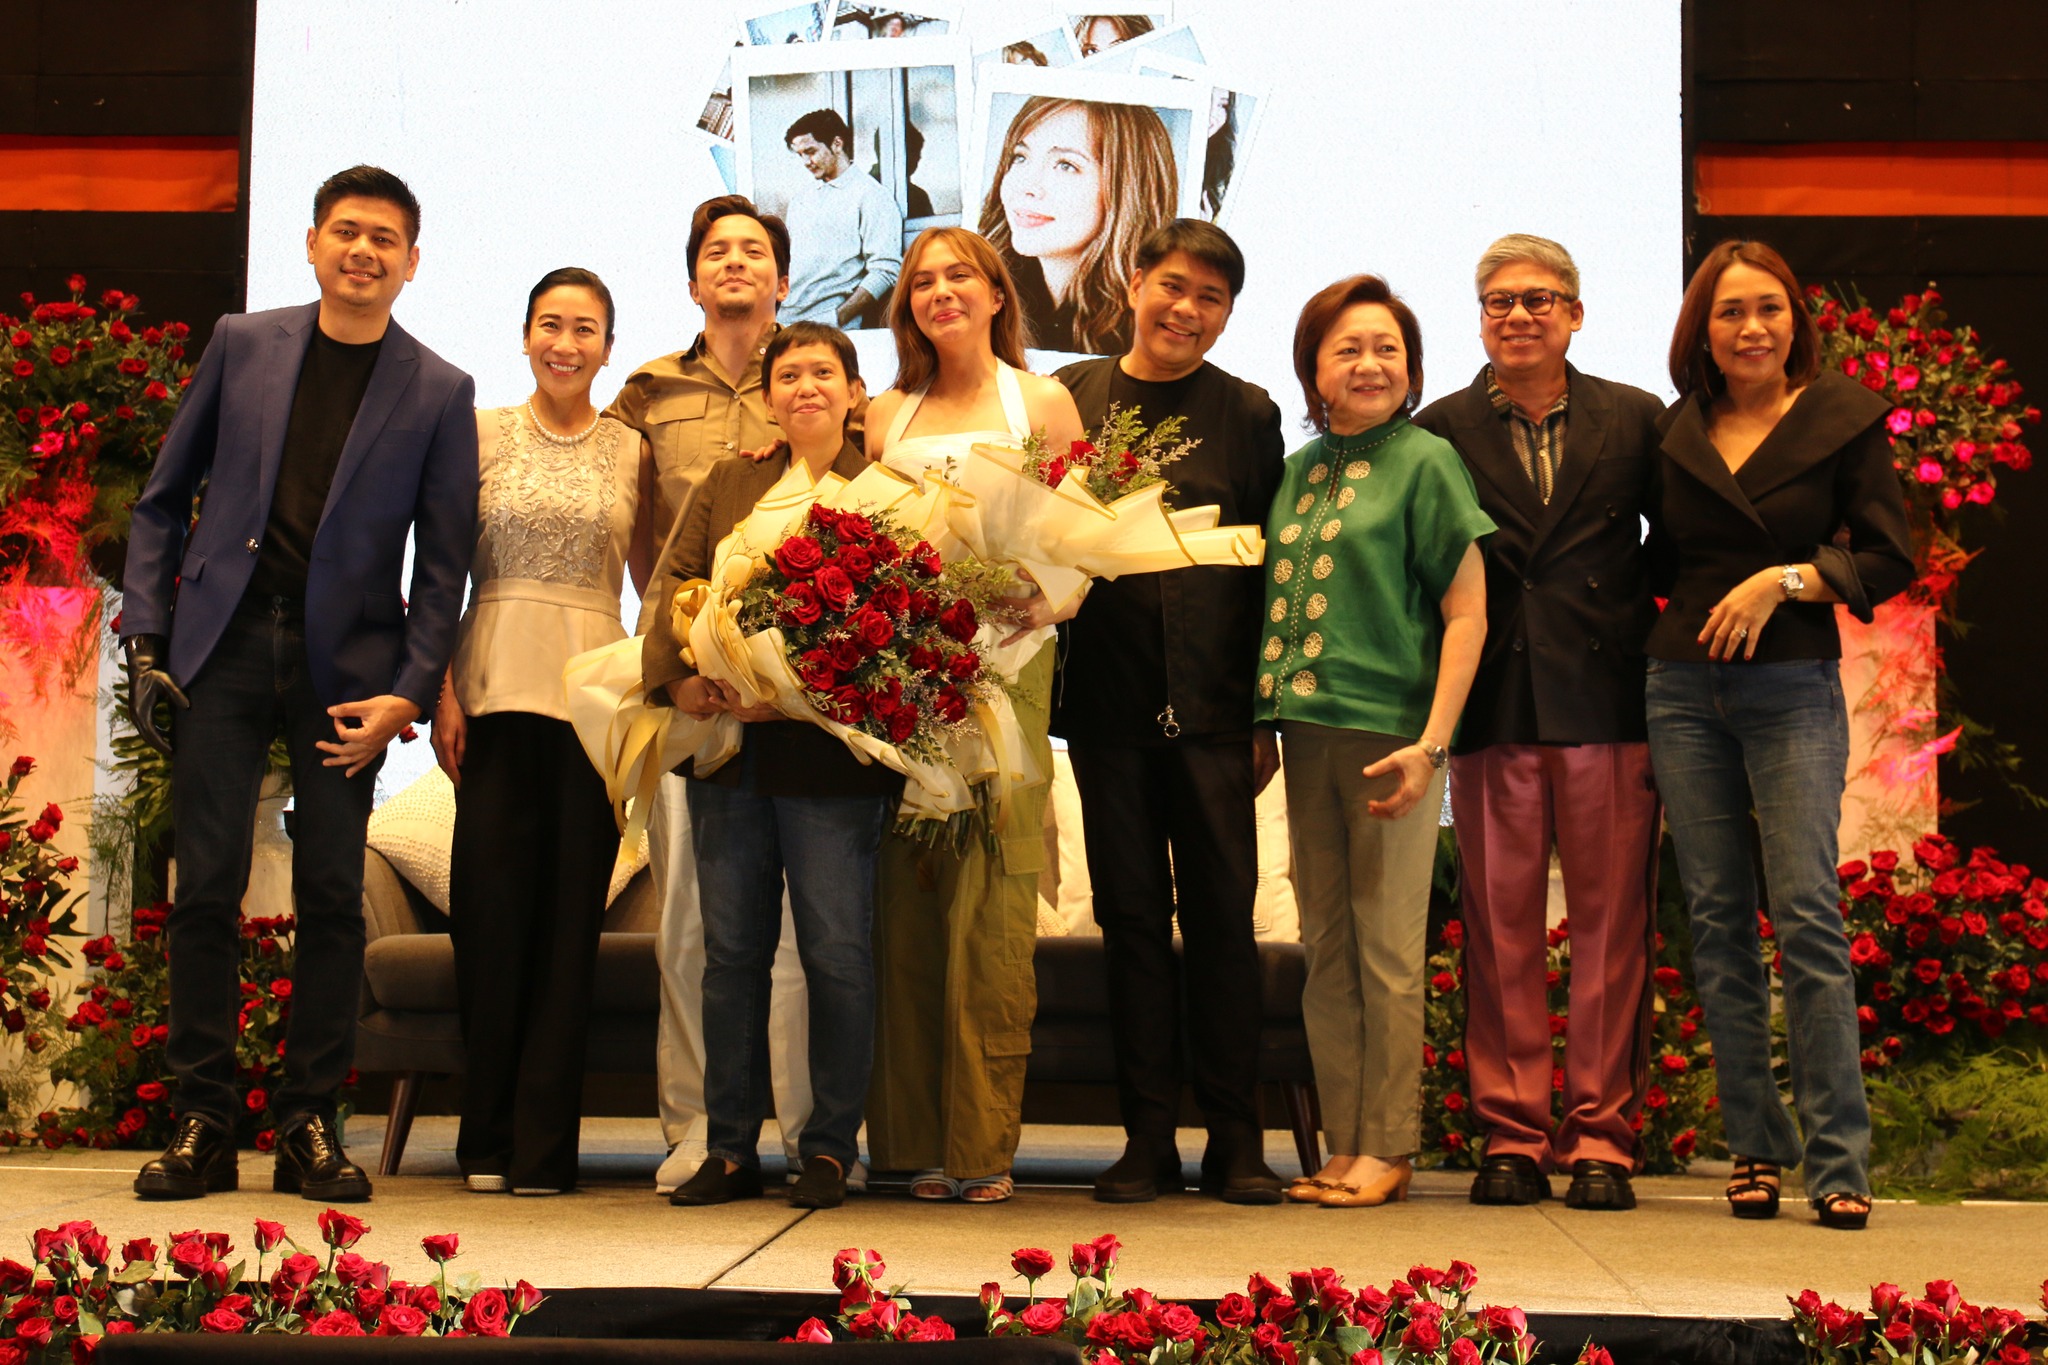 Cast and team behind 'Five Break-Ups and a Romance'